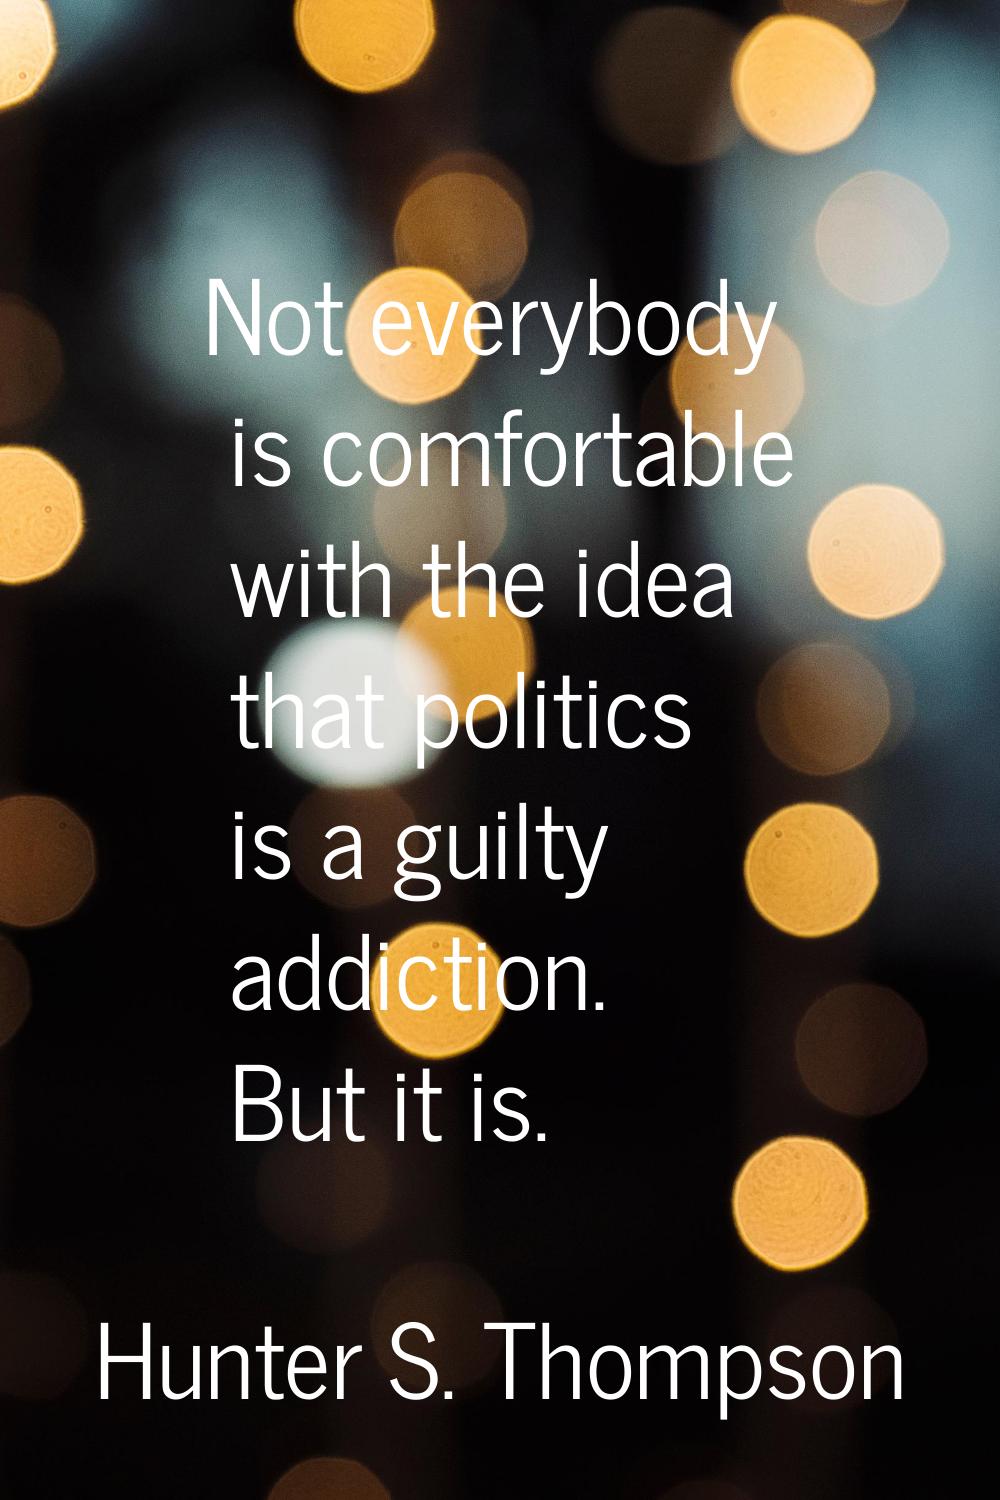 Not everybody is comfortable with the idea that politics is a guilty addiction. But it is.